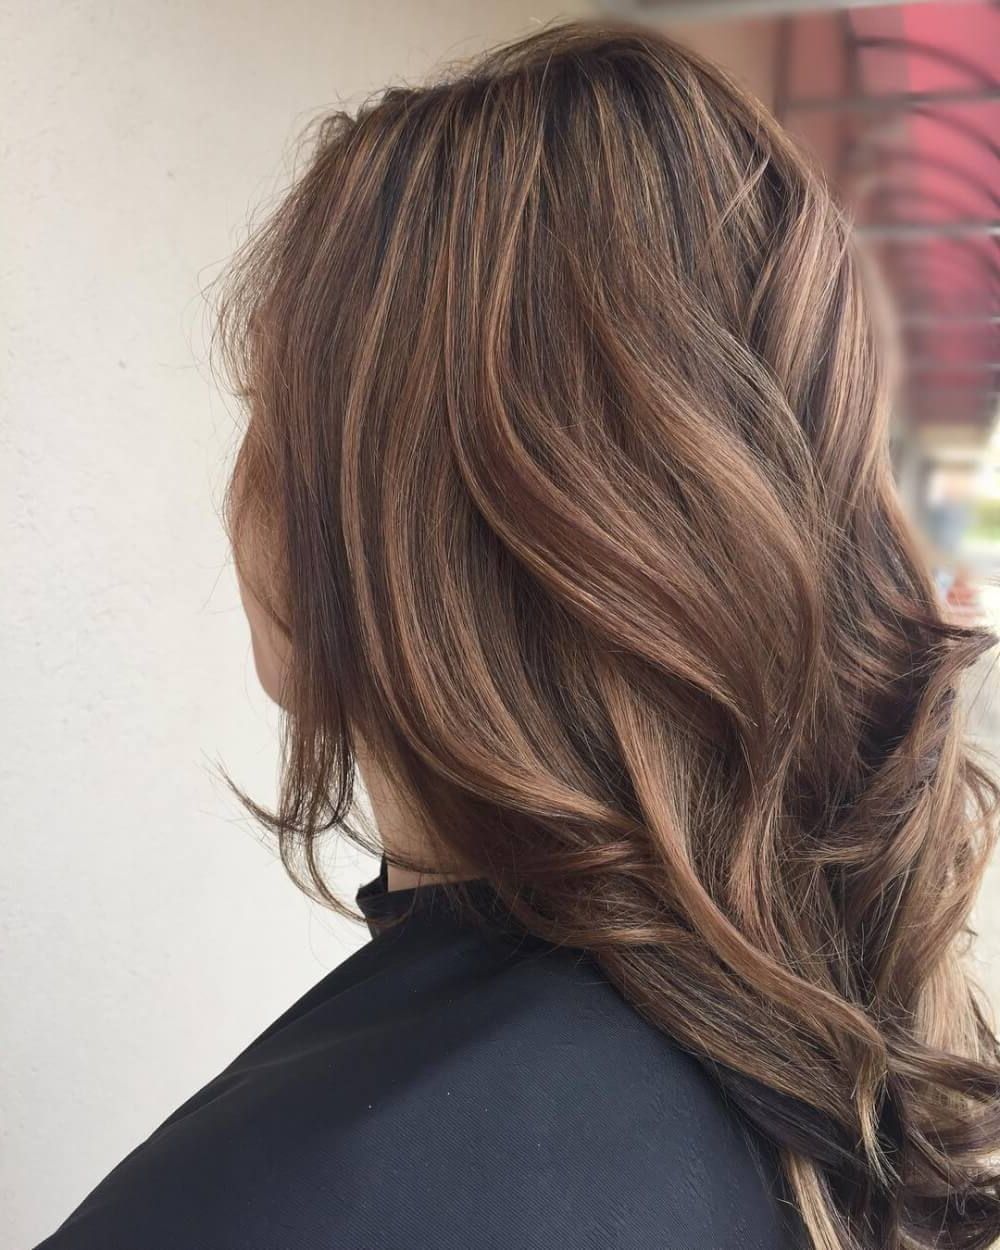 34 Light Brown Hair Colors That Are Blowing Up In 2018 Throughout Golden Brown Thick Curly Bob Hairstyles (View 15 of 25)